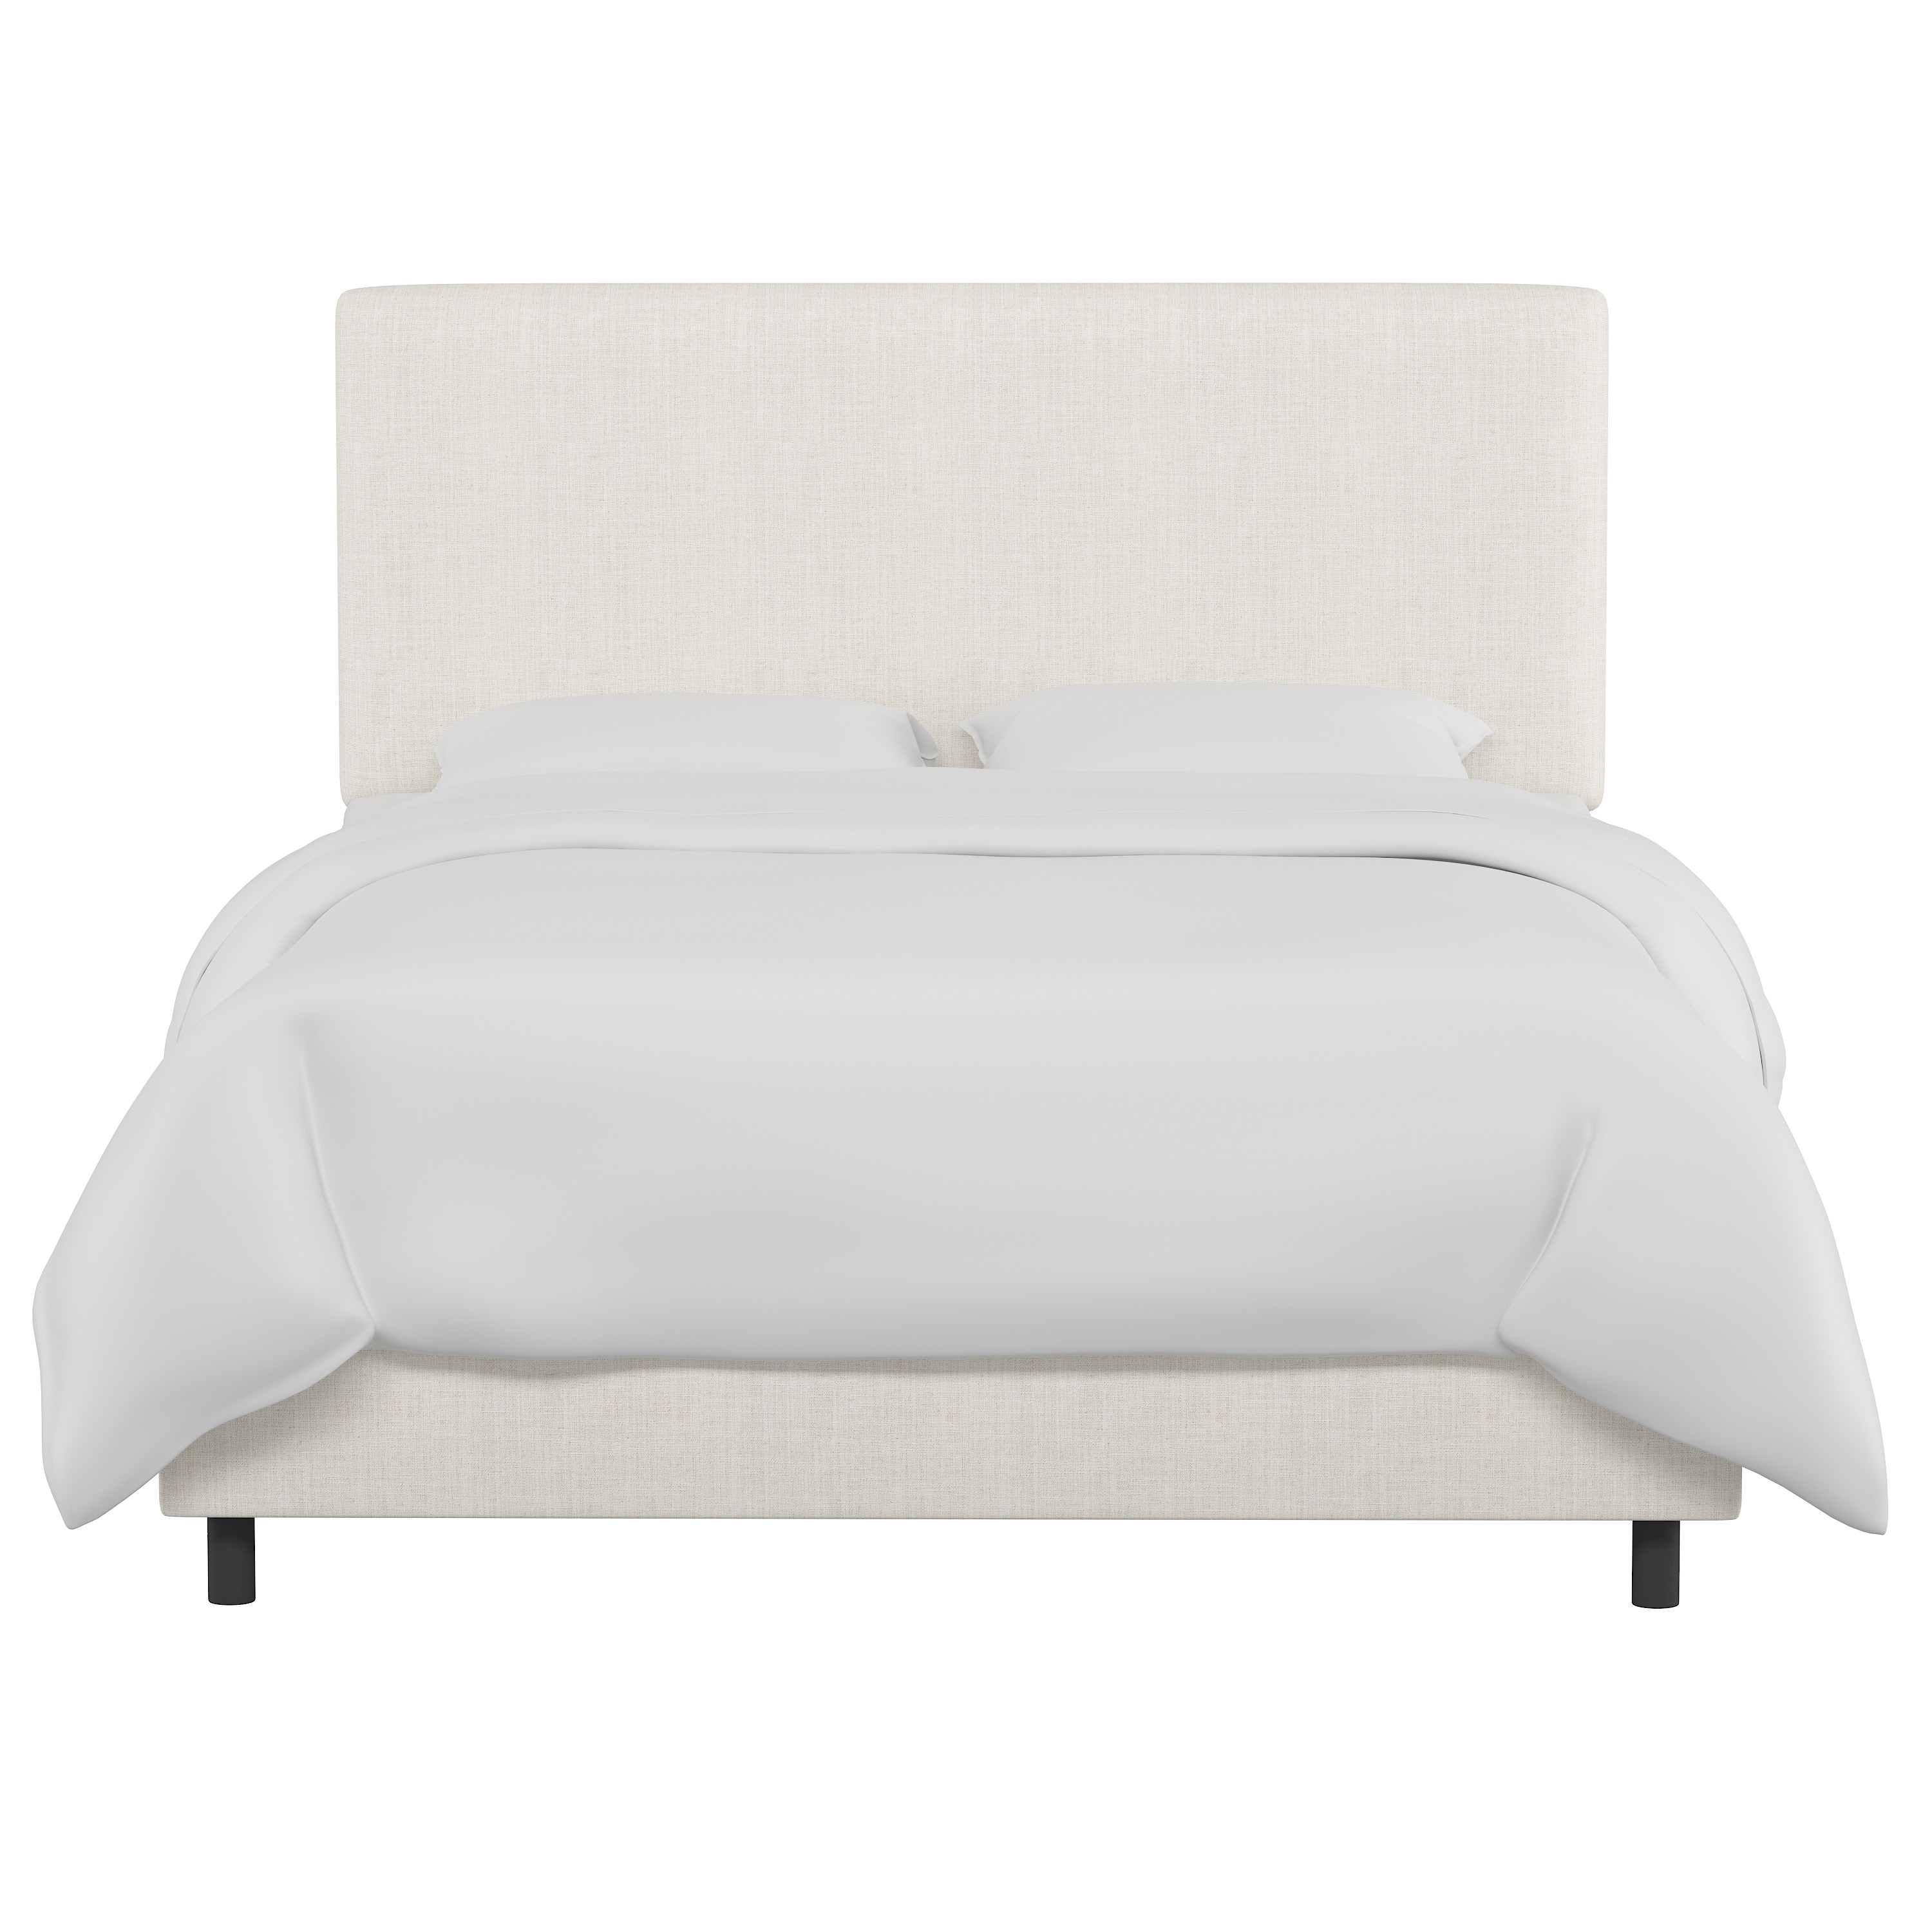 King Sawyer Bed in Linen Talc - Image 2